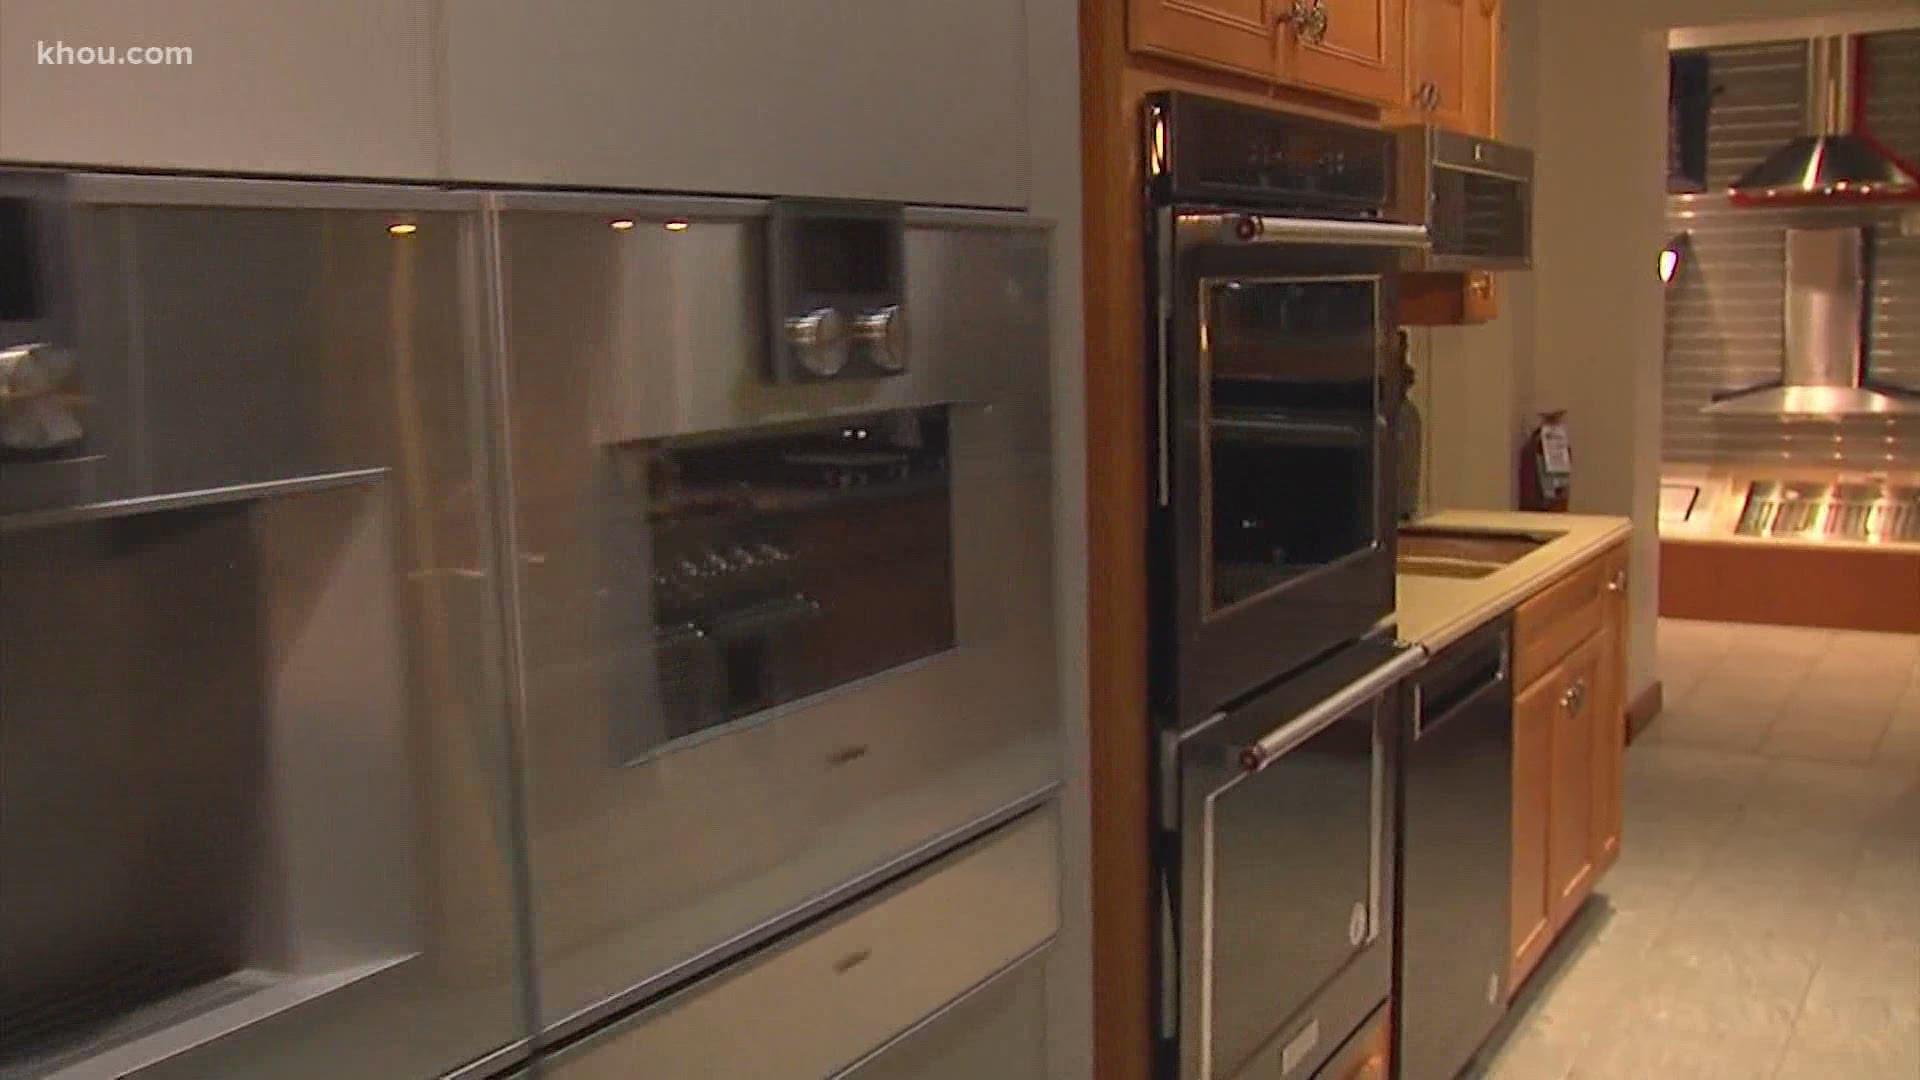 Looking for a new fridge, dishwasher, or range?
The appliance shortage that began in March shows no sign of letting up.